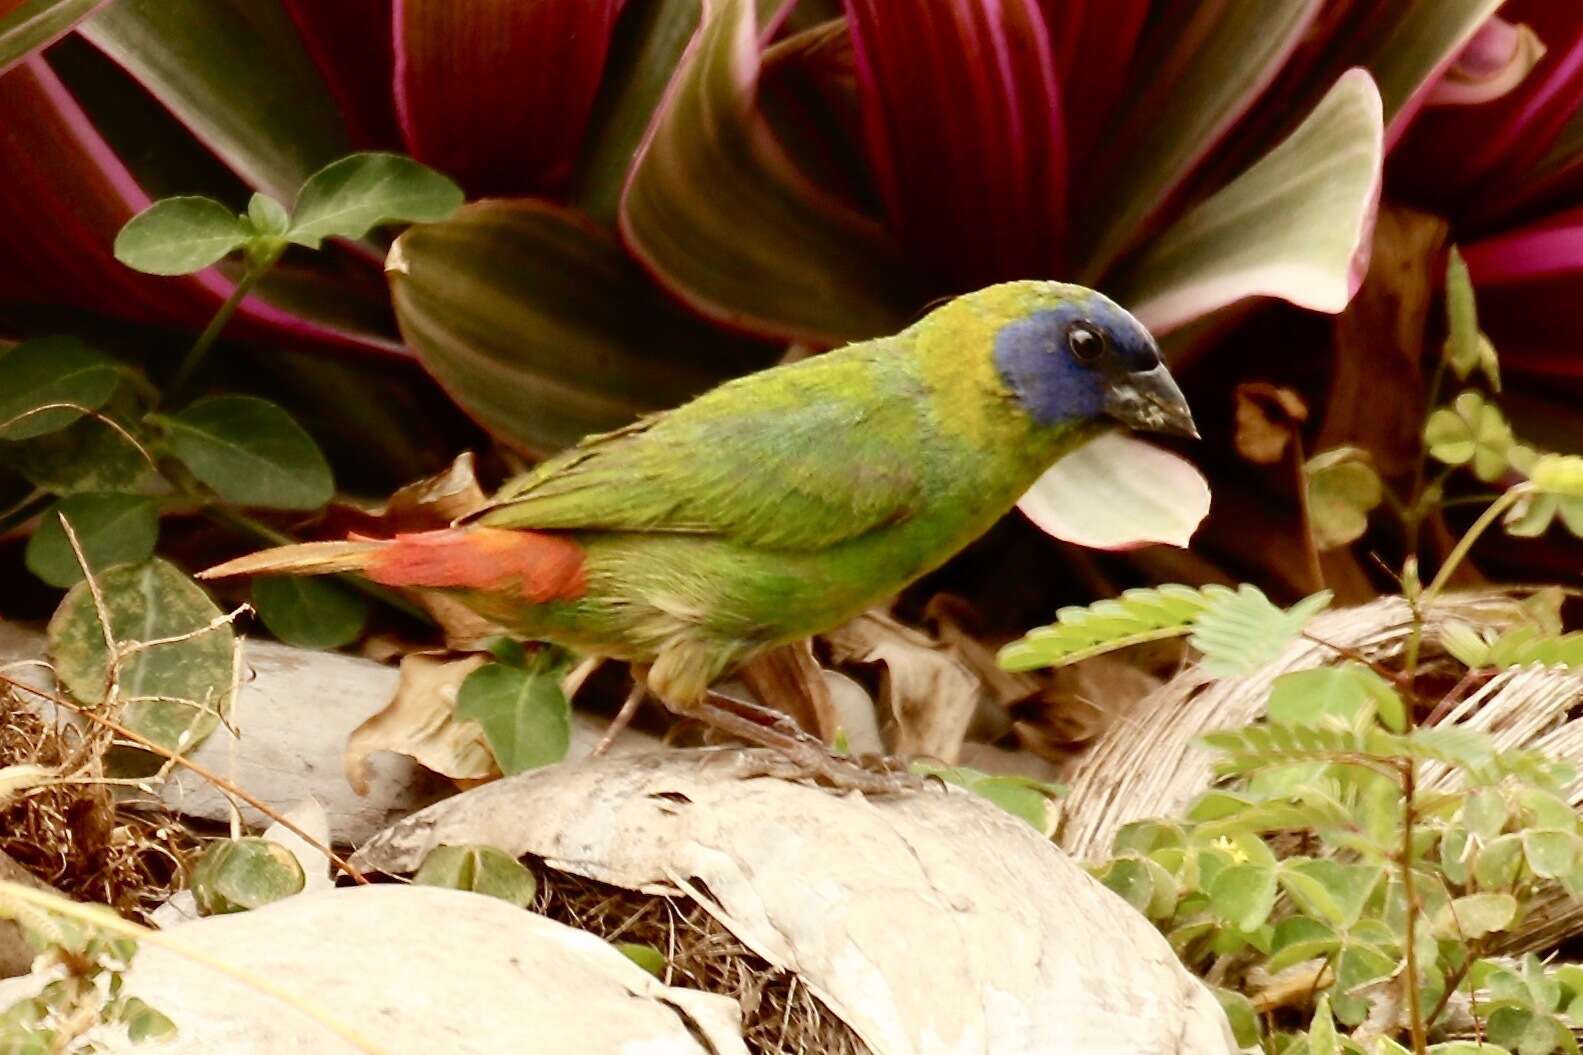 Image of Blue-faced Parrot-Finch